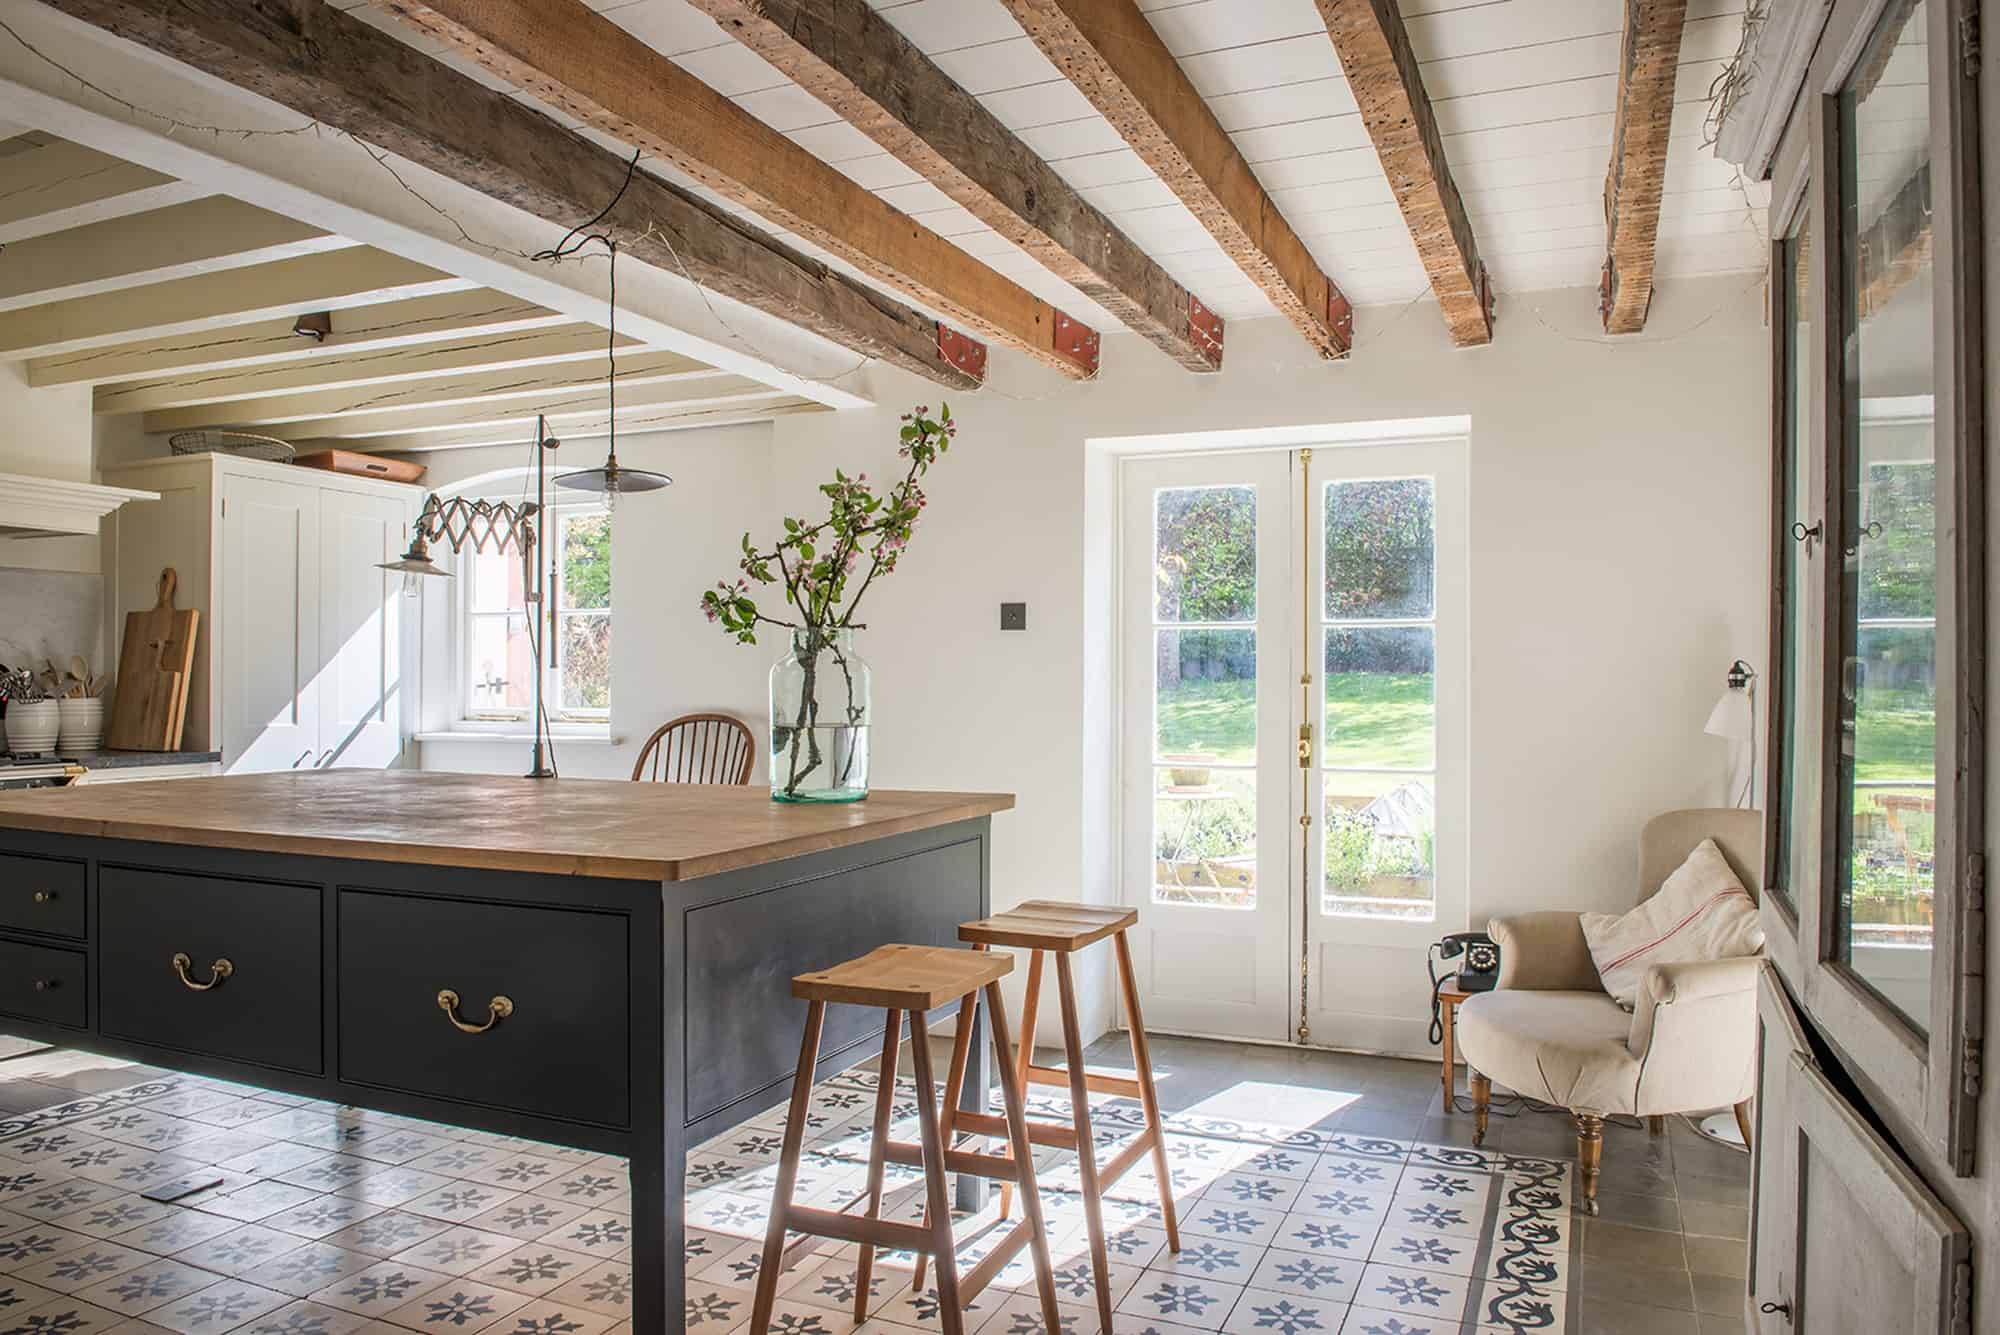 Brook Lodge SO24 - A beautiful farmhouse style property with paired back interiors and nestled within one acre of private gardens - The Location Guys